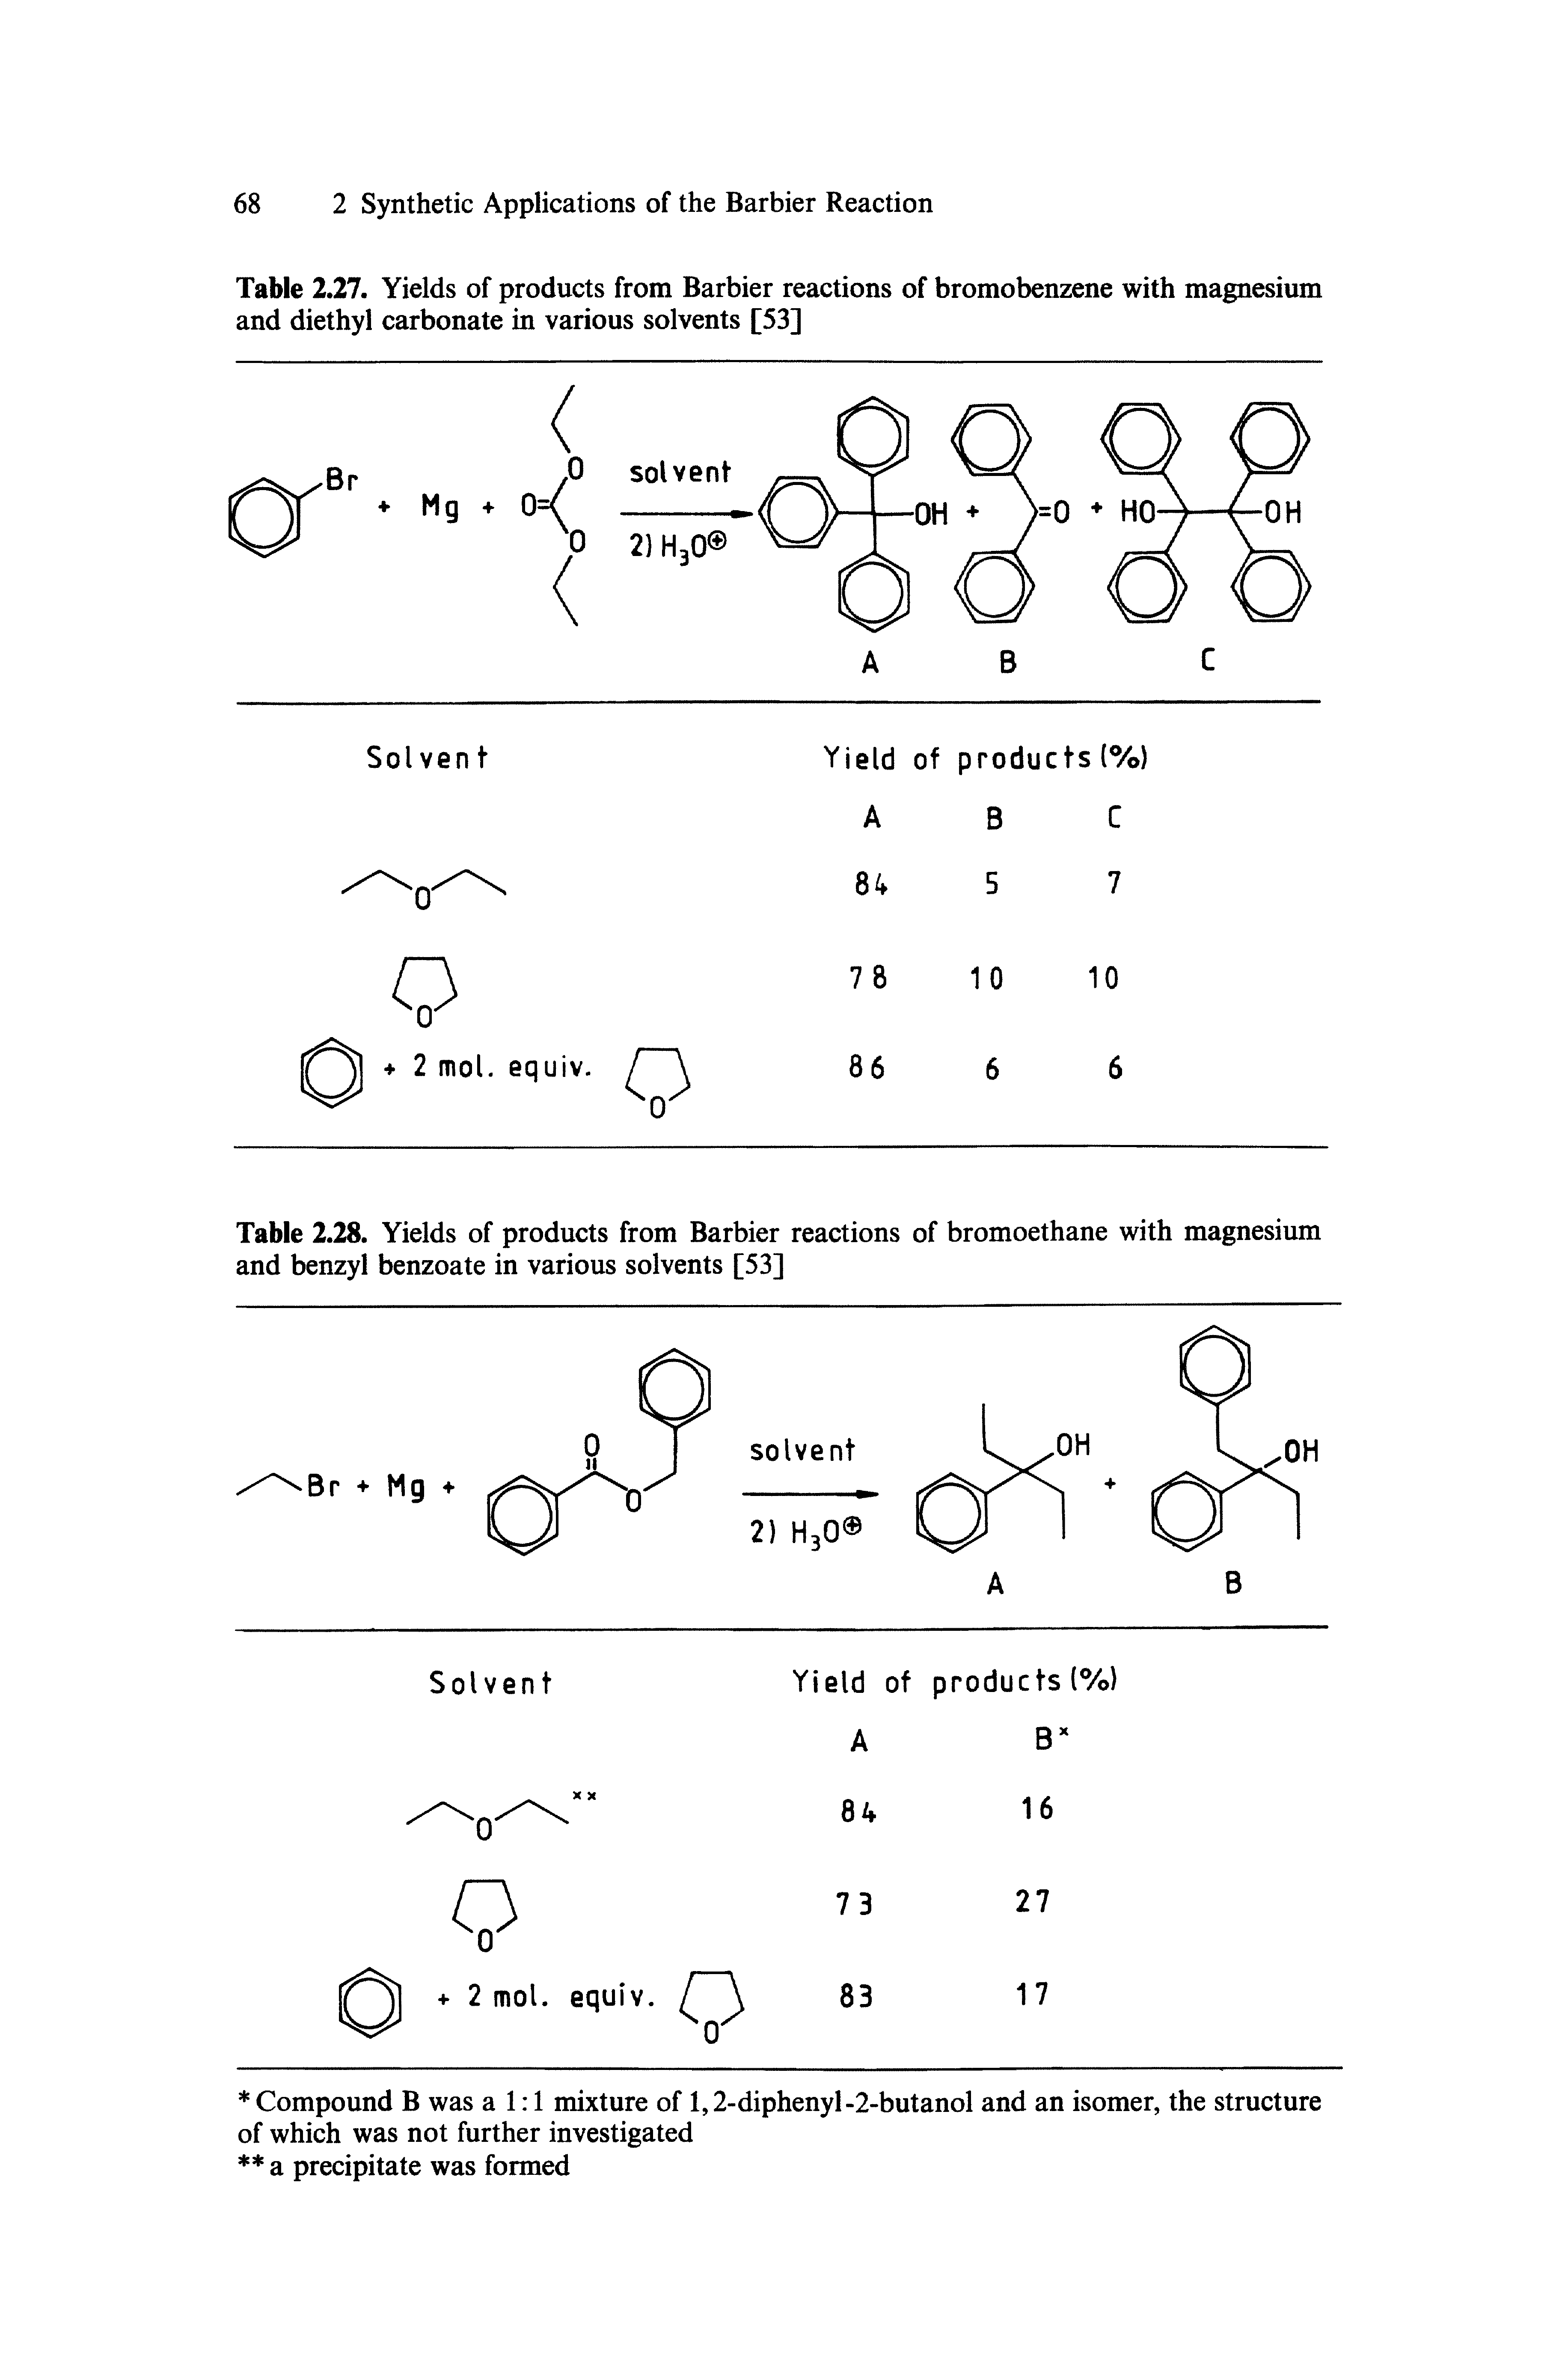 Table 2.27. Yields of products from Barbier reactions of bromobenzene with magnesium and diethyl carbonate in various solvents [53]...